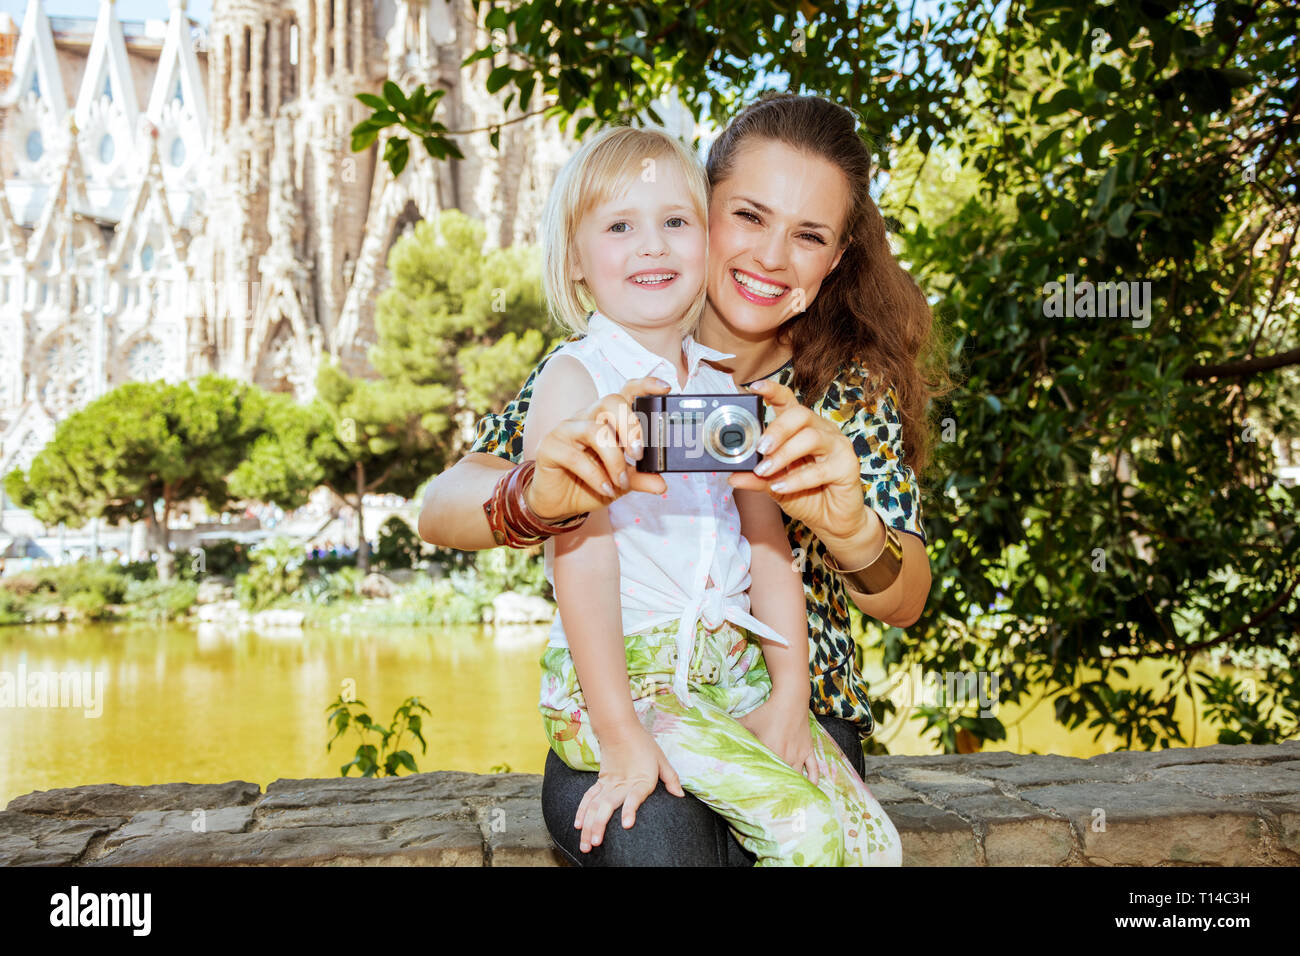 Barcelona - August, 06, 2015: smiling modern mother and child tourists taking photo with digital camera in Barcelona, Spain. Stock Photo